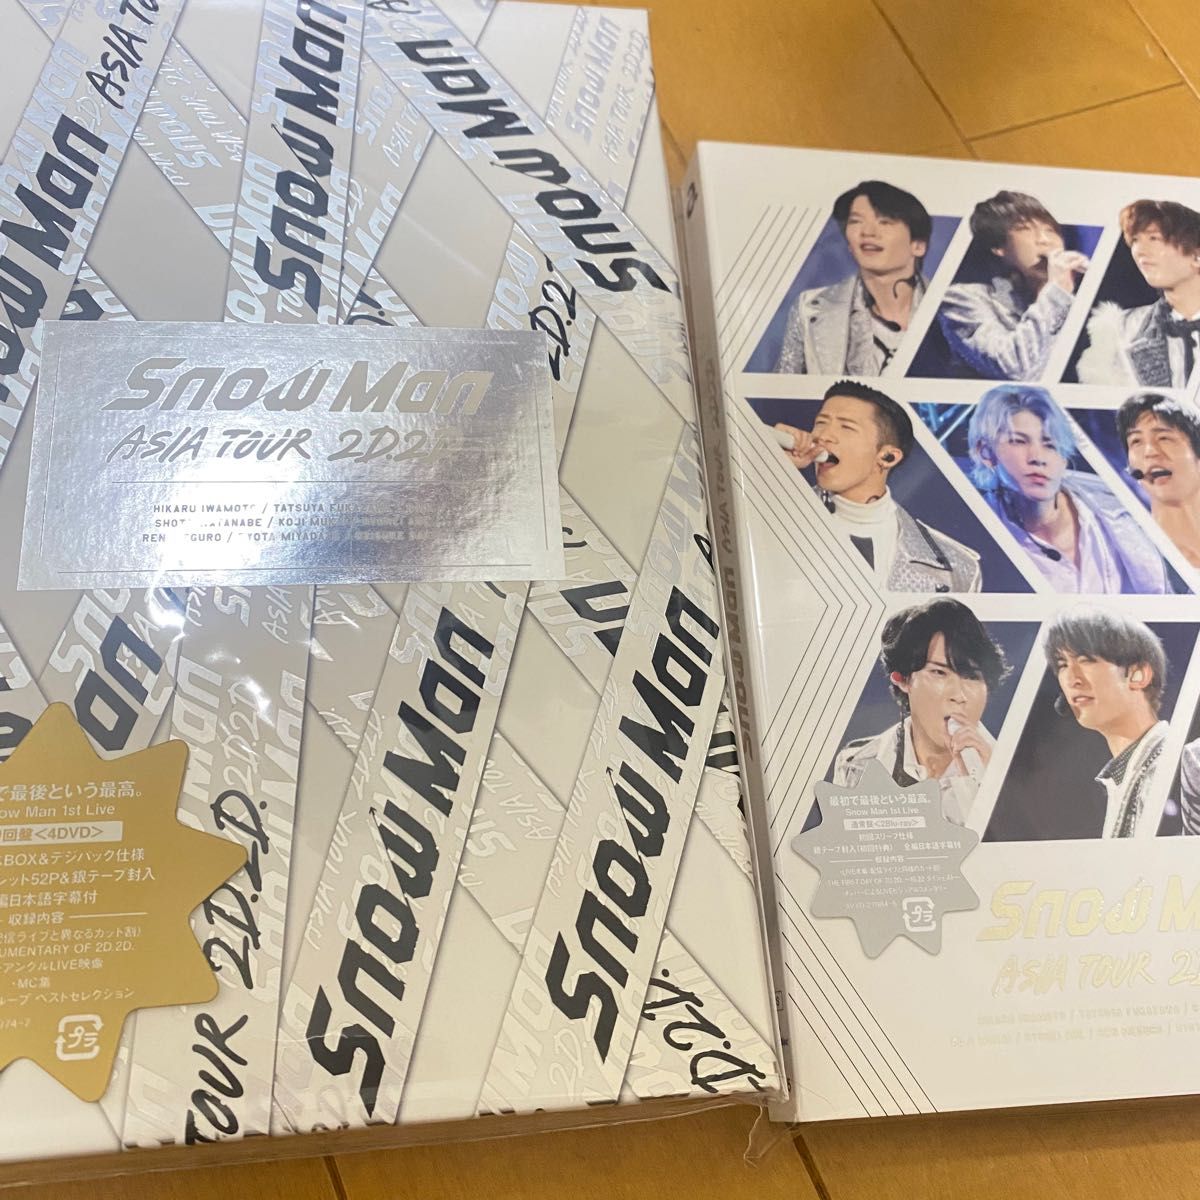 SnowMan ライブDVD Blu-ray ASIA TOUR 2D2D 初回盤&通常盤セット 